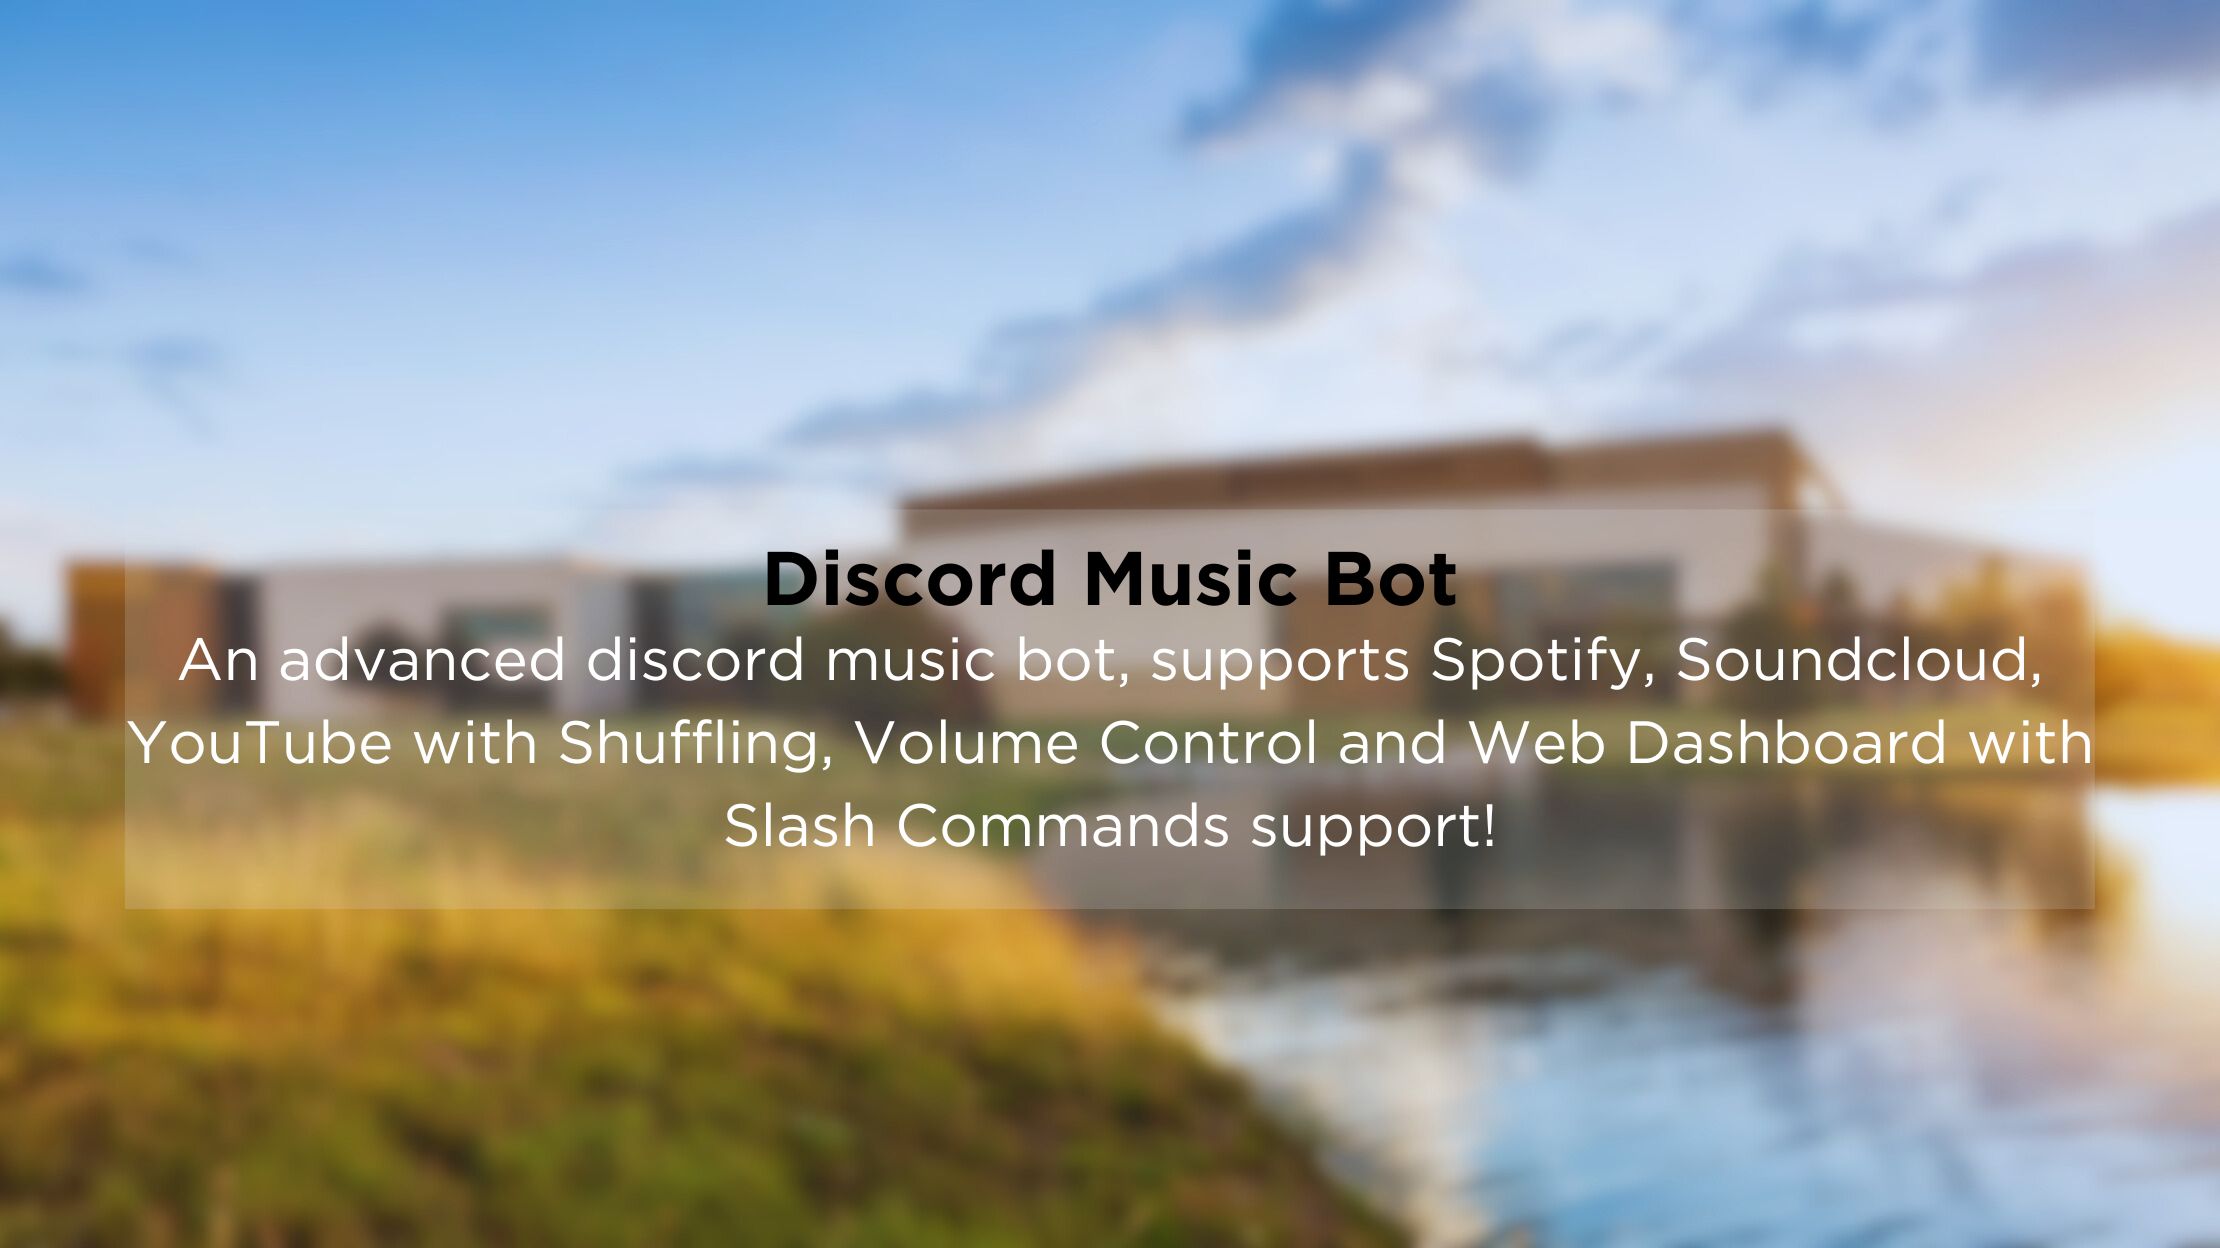 An advanced discord music bot, supports Spotify, Soundcloud, YouTube with Shuffling, Volume Control and Web Dashboard with Slash Commands support!